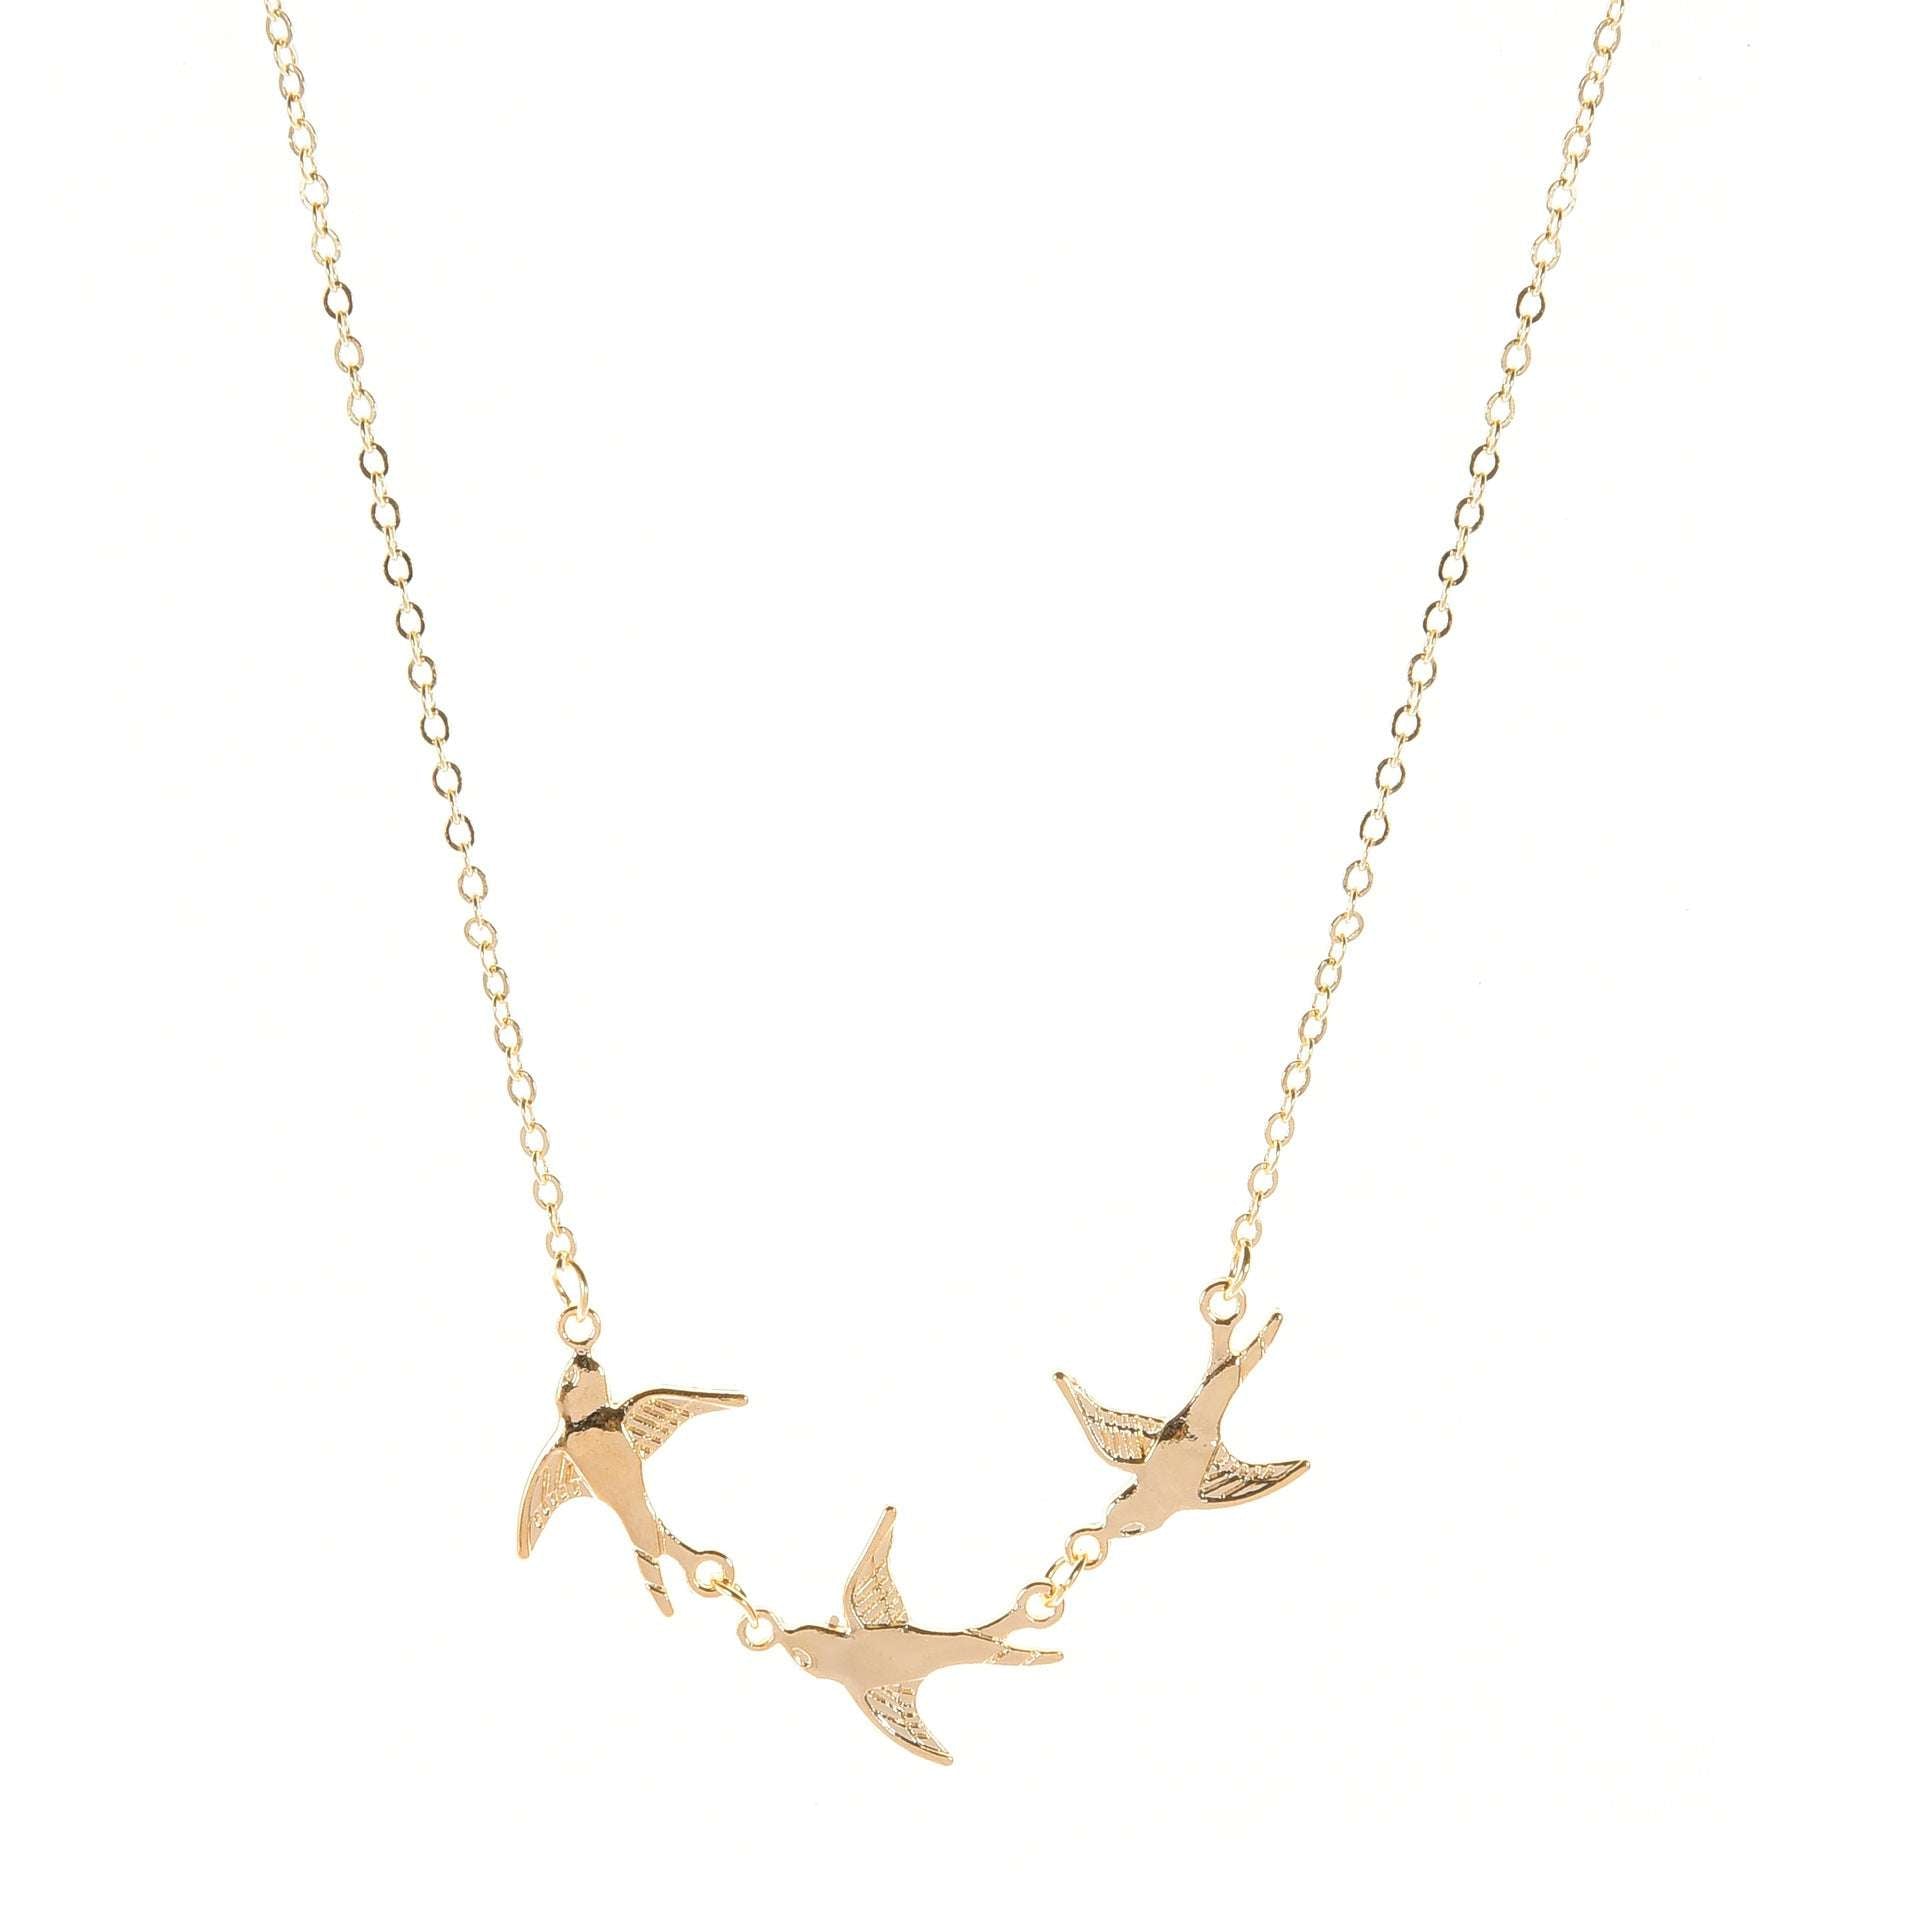 Fashionable necklace, Peace dove necklace, Women's jewelry - available at Sparq Mart